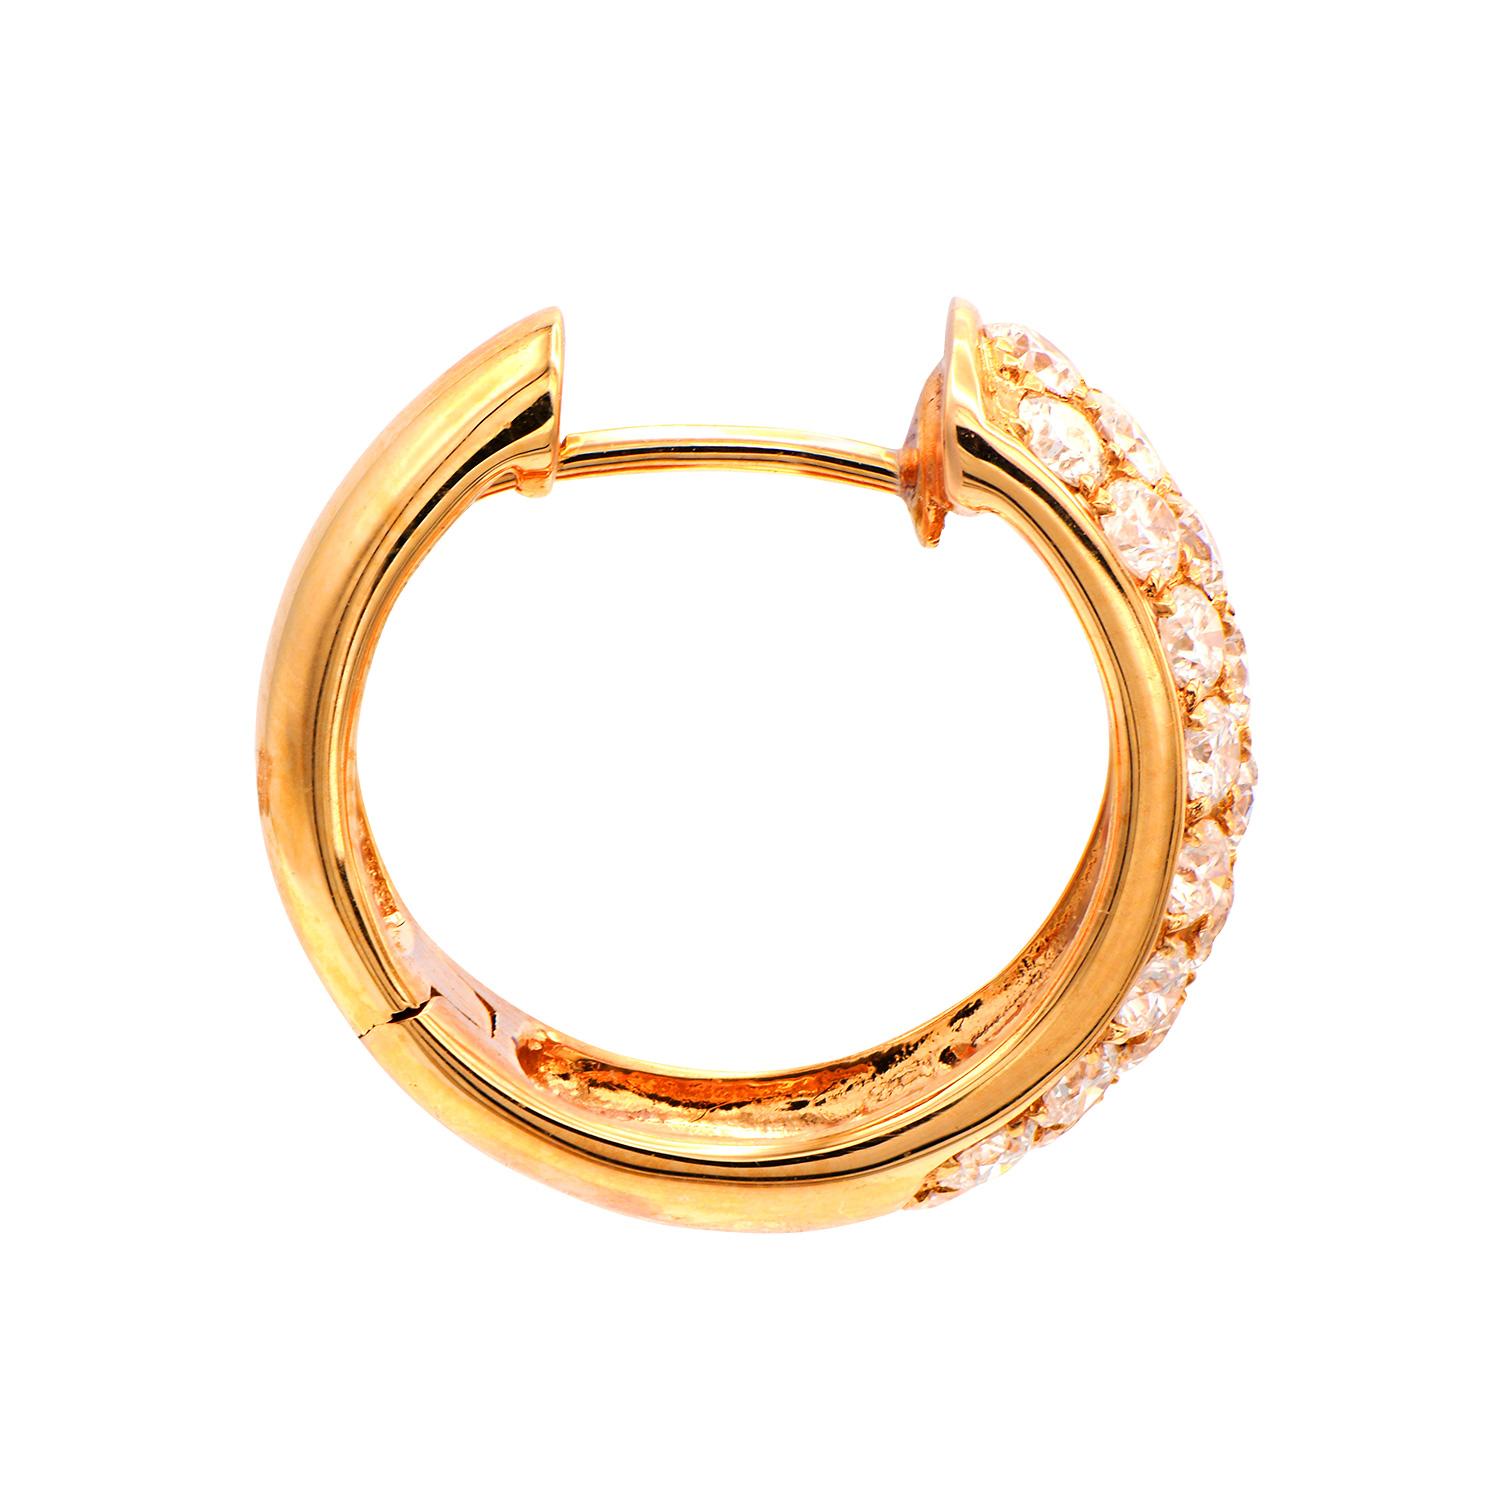 These beautiful hoop earrings are made of 4.9 grams for 18 karat rose gold. Each one has 3 rows of stunning VS2, G color diamonds. The total diamond weight is 1.47 carats which is made up of 50 round diamonds. These earrings are securely closed with